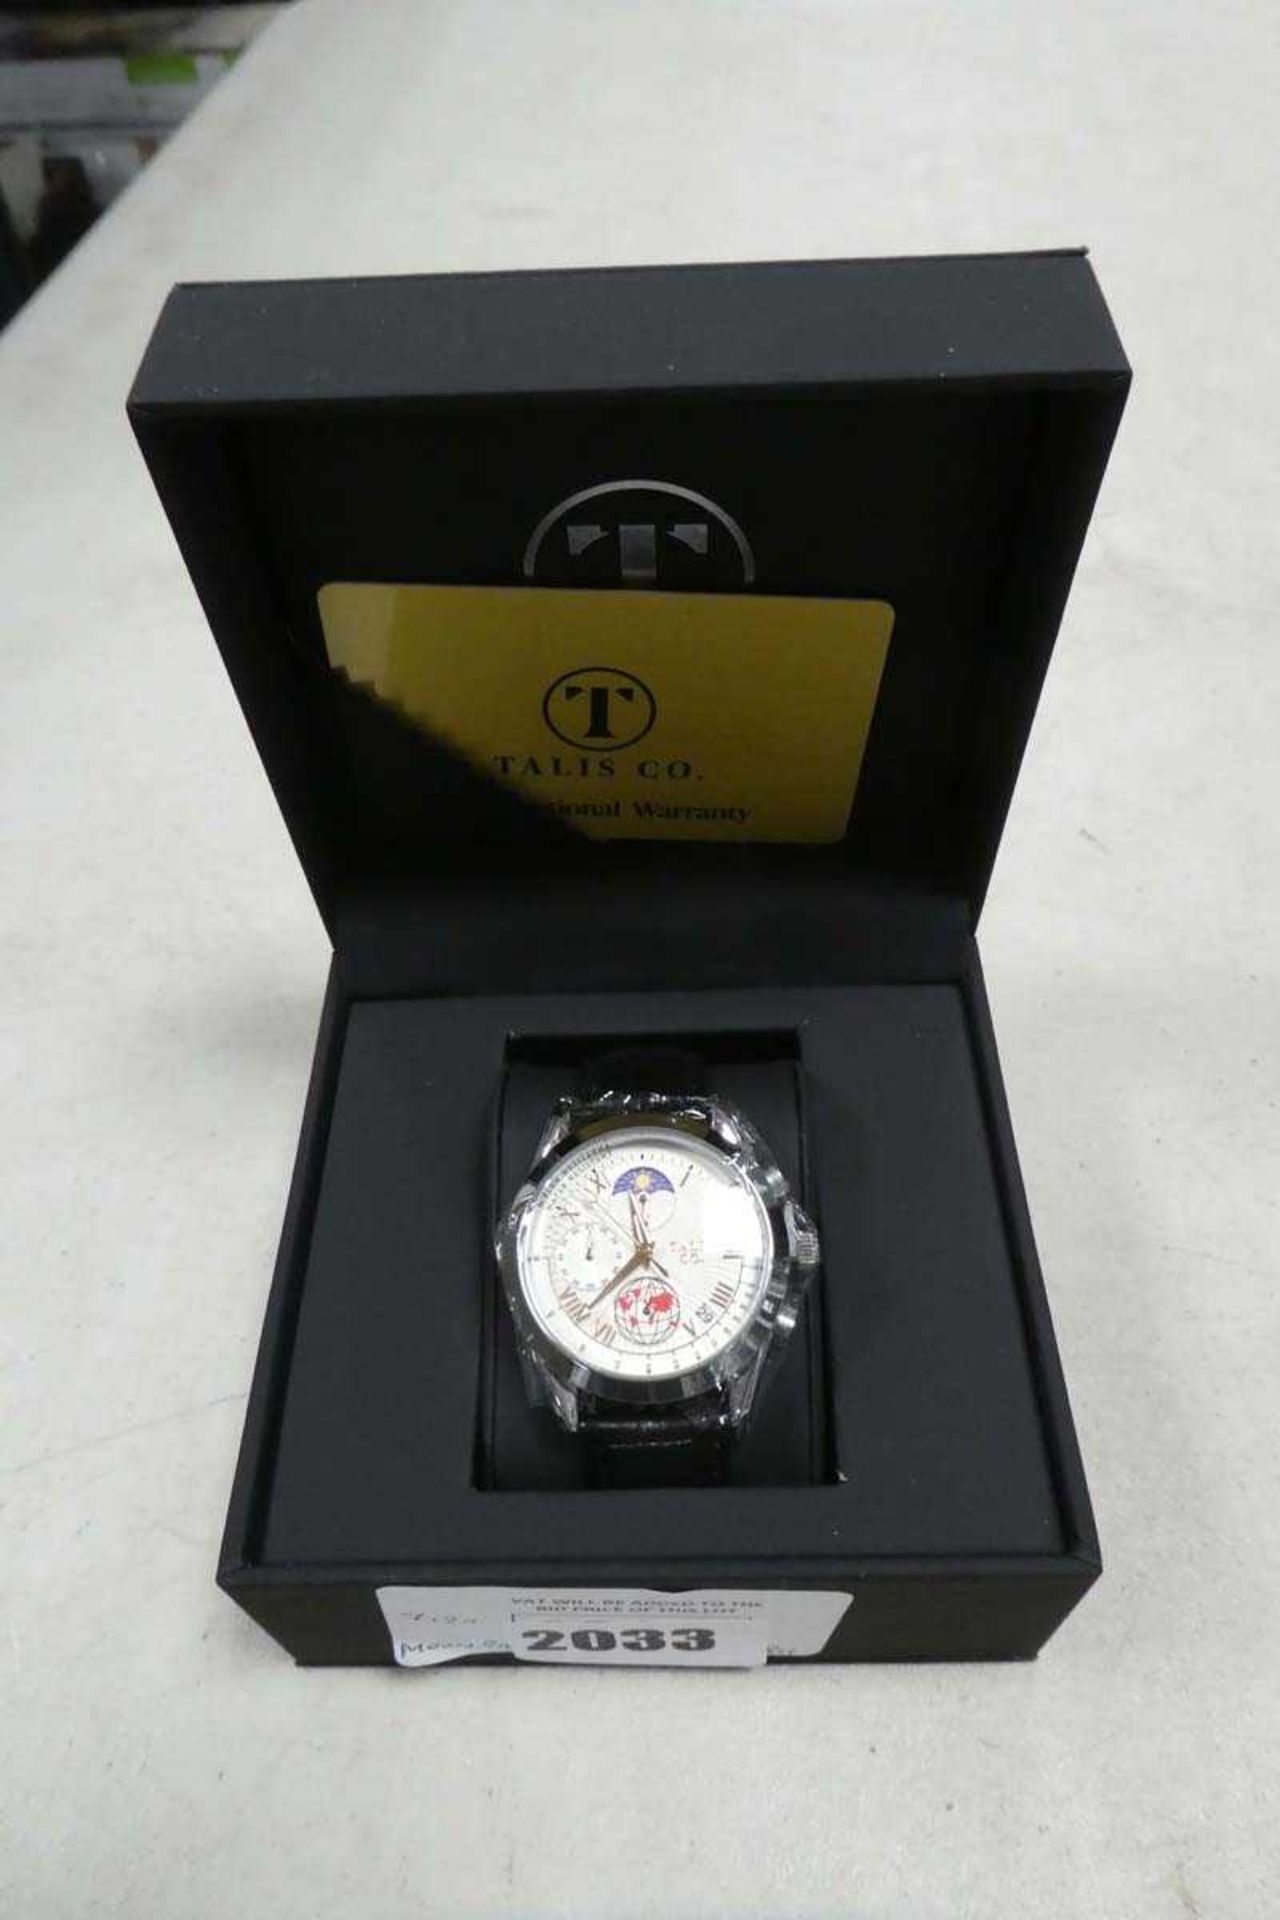 +VAT Talis Co moon phase dial chronograph wristwatch numbered 7120 with box